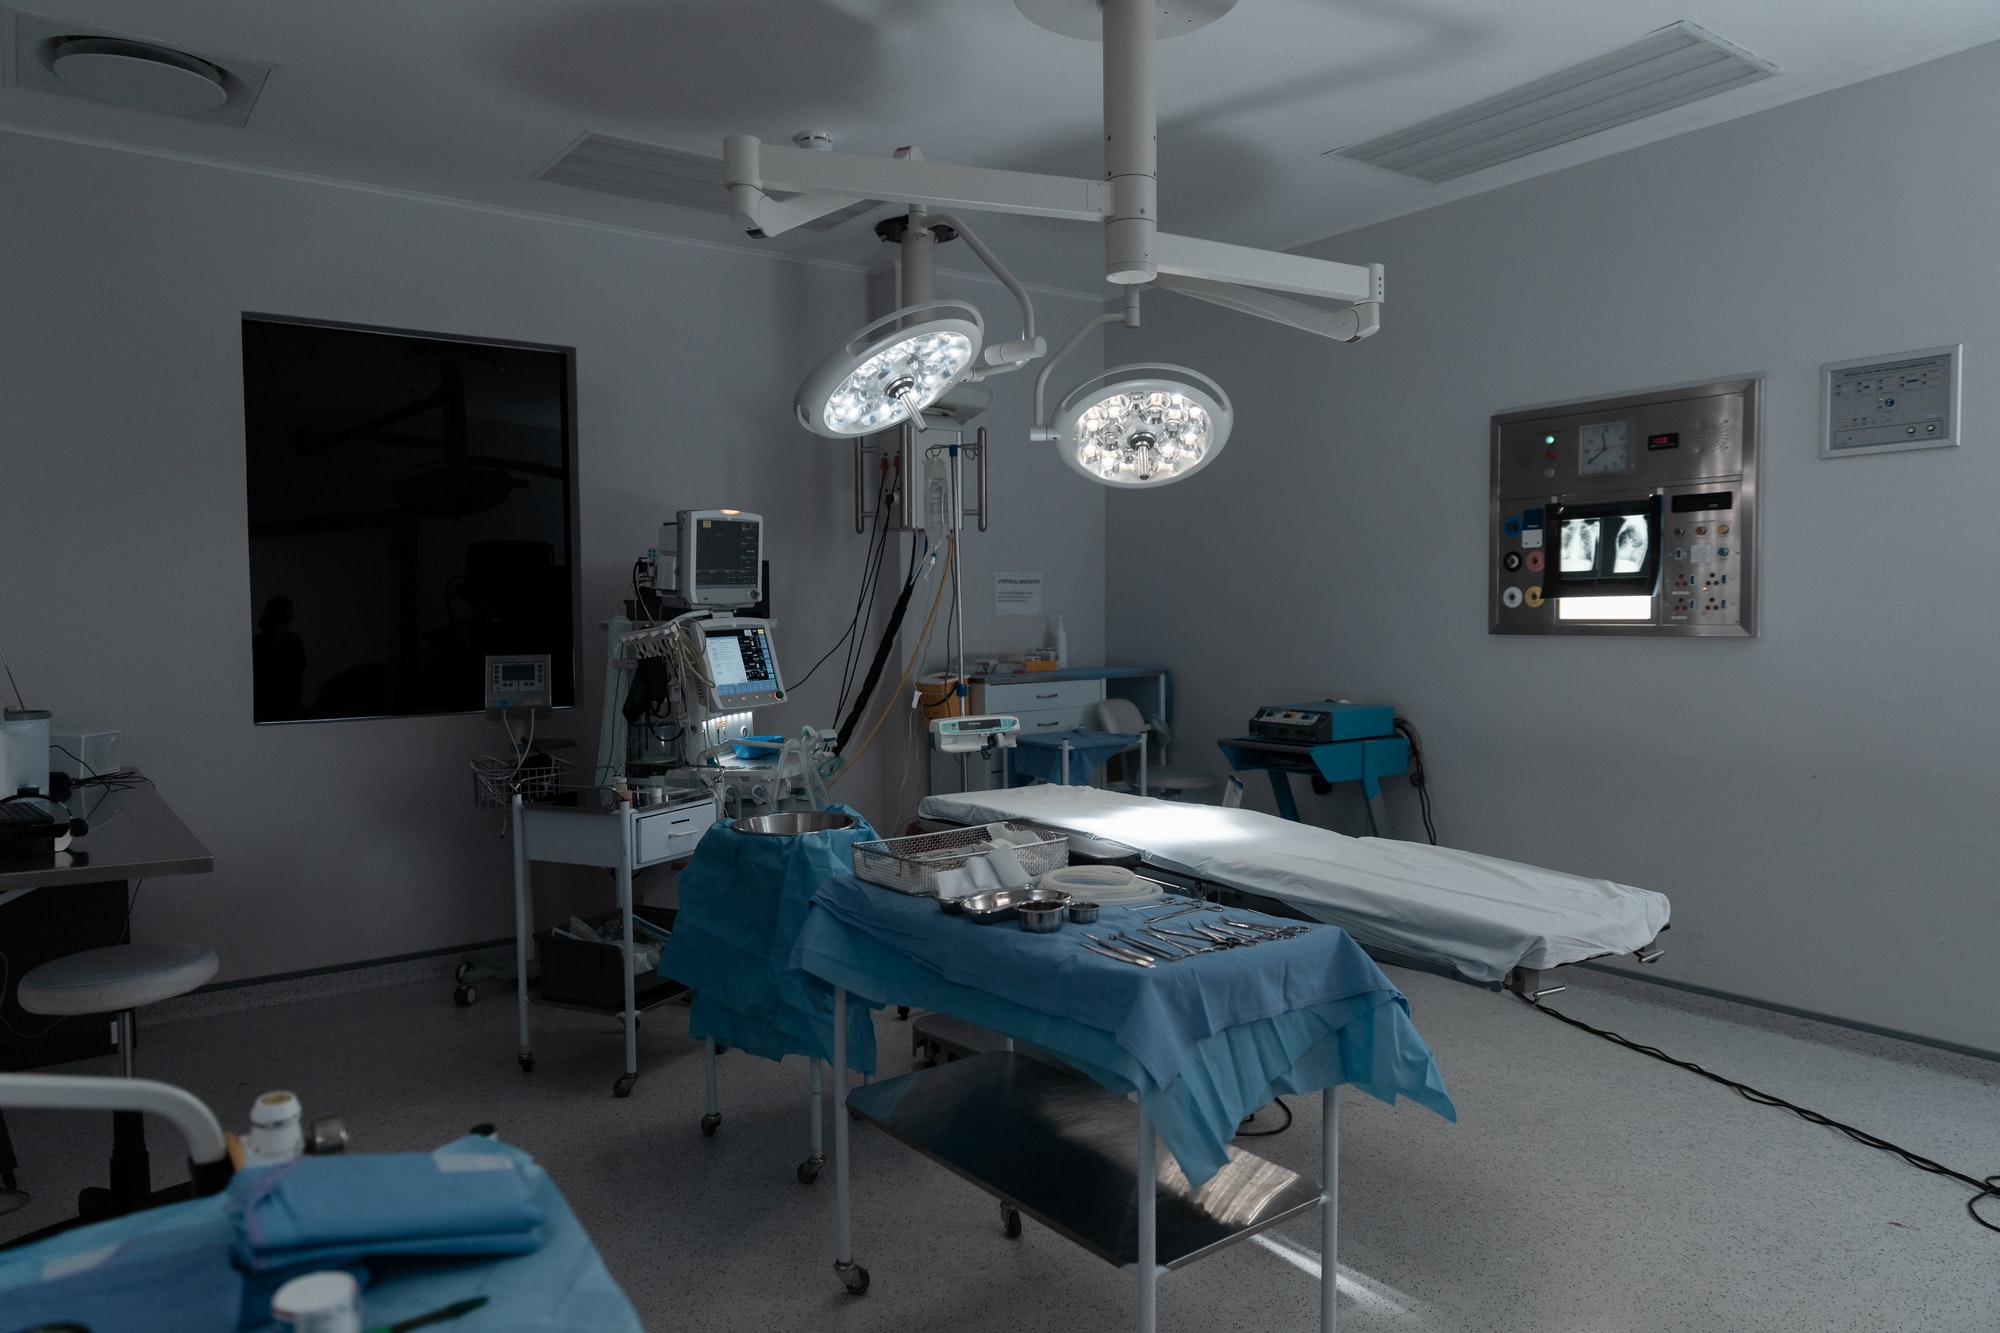 Surgical instruments, operating table, lights and equipment in modern hospital operating theatre